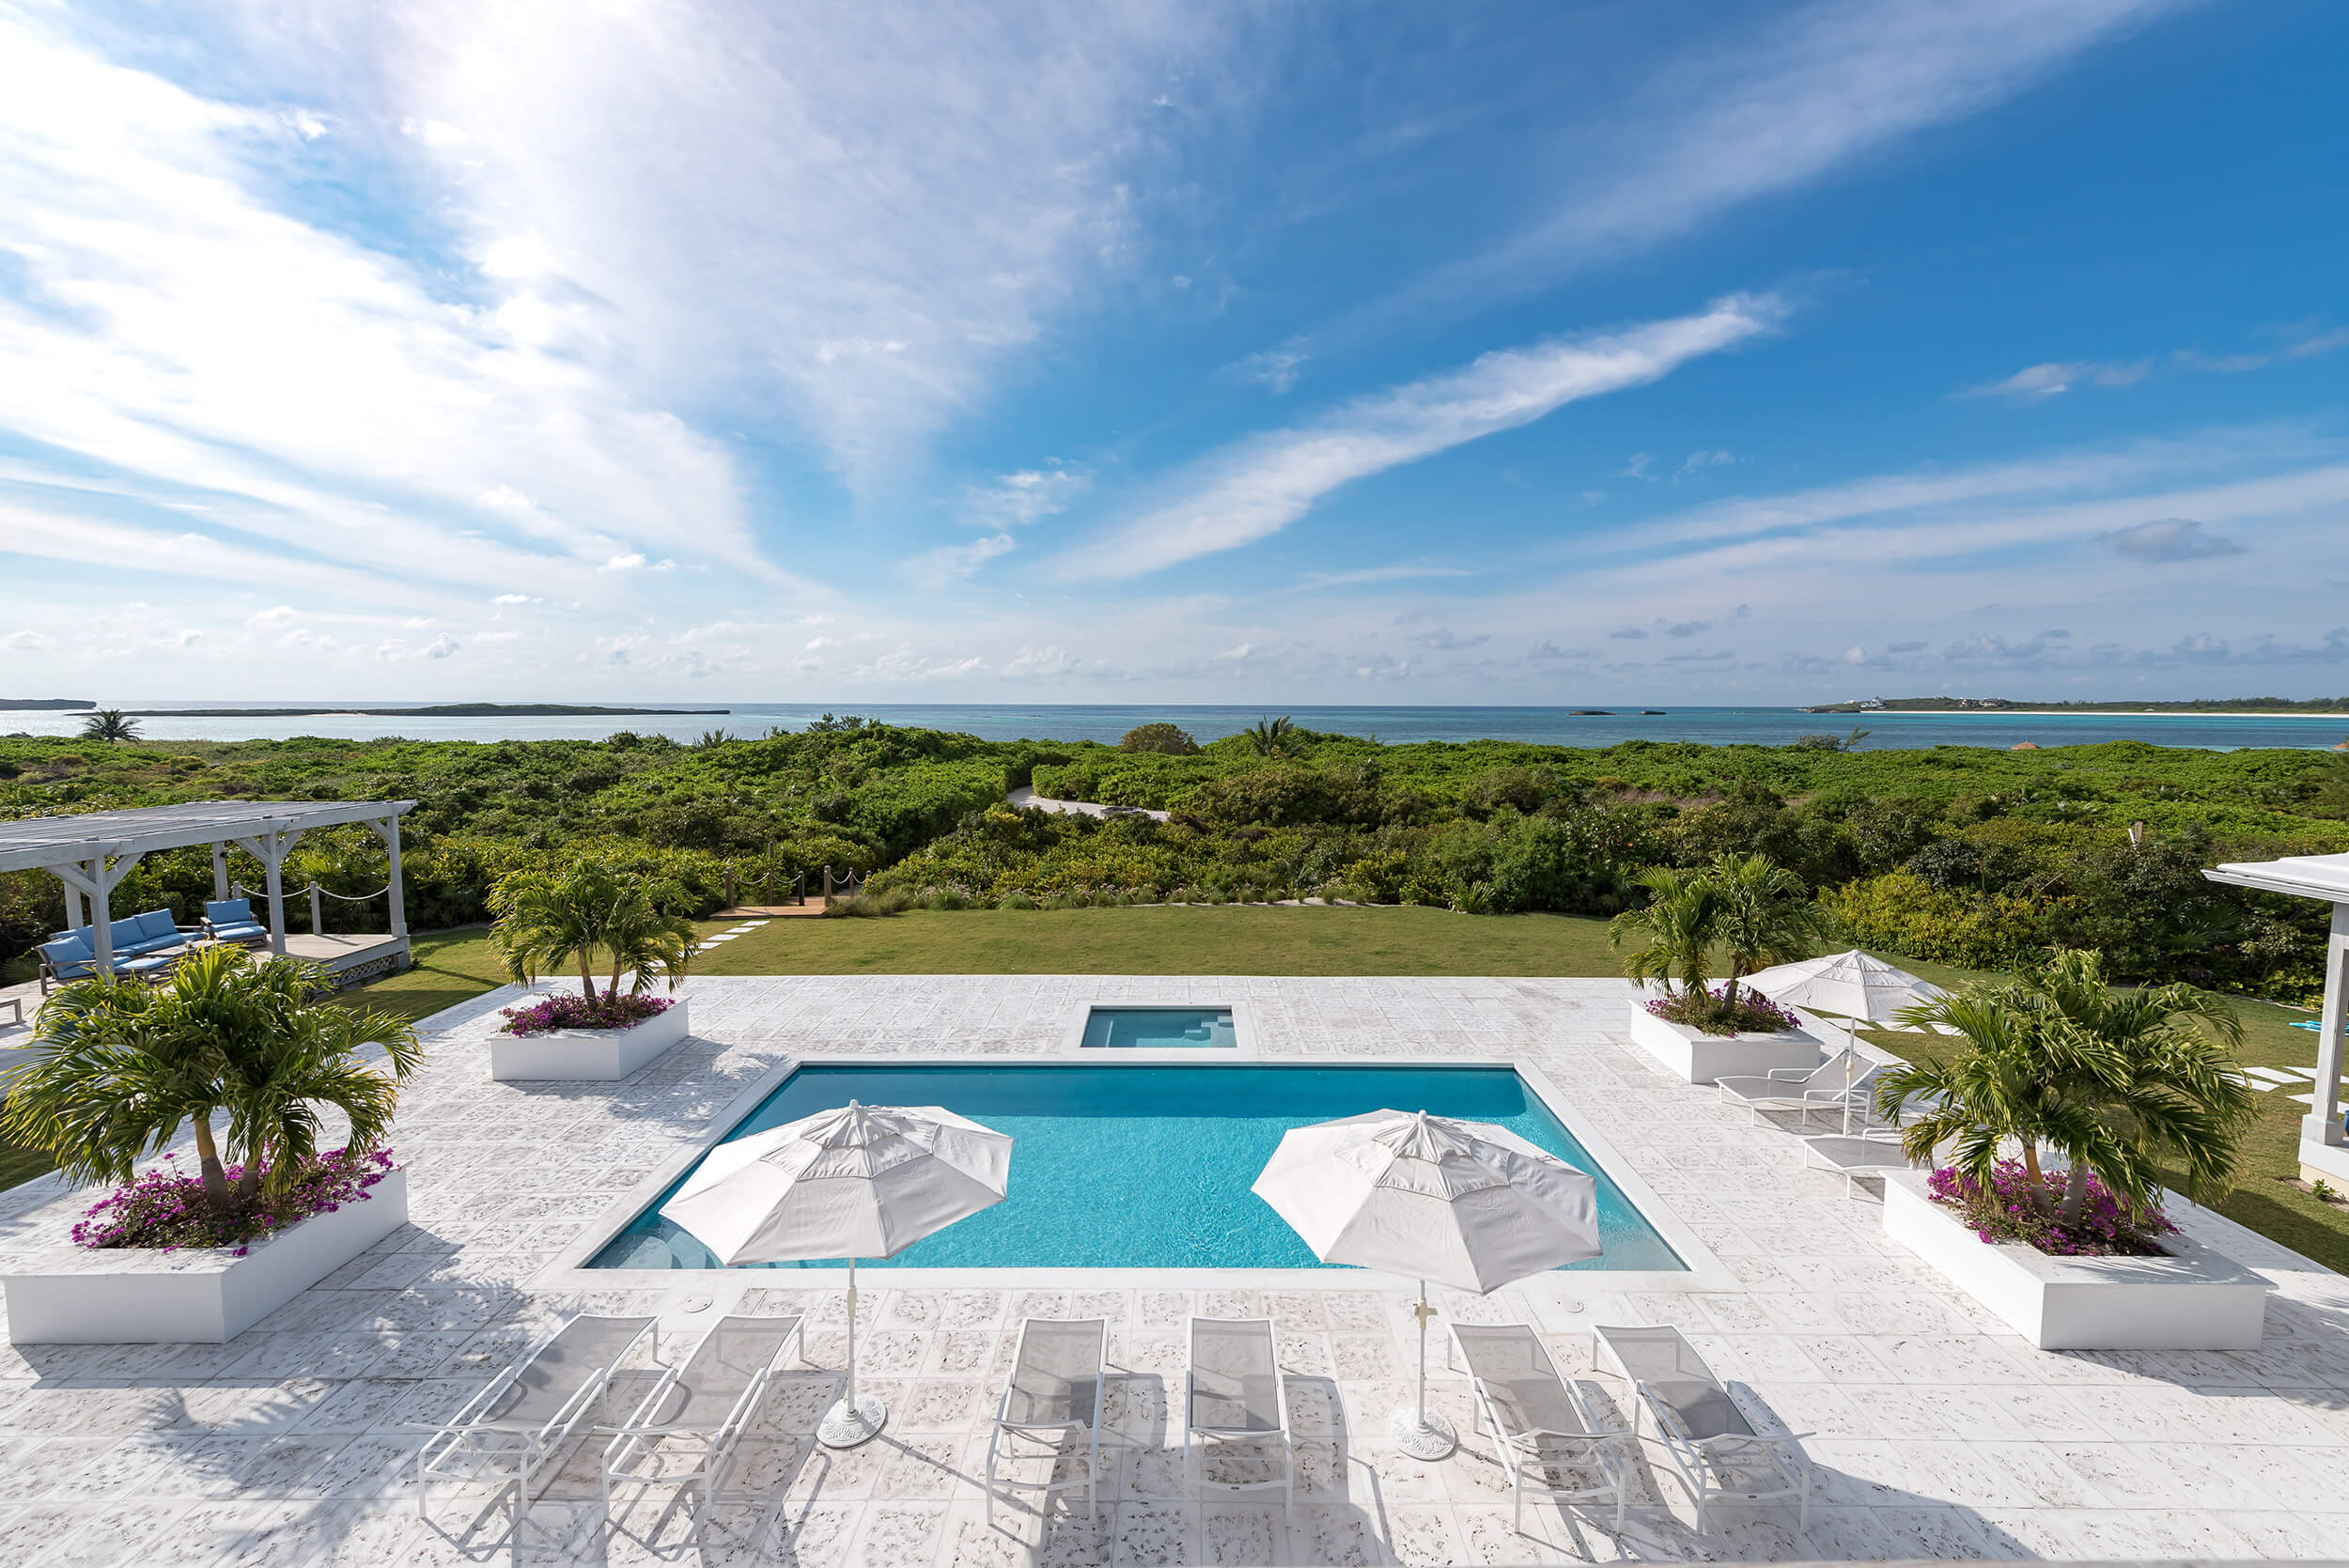 Infinity pool with ocean views from The Abaco Club in The Bahamas